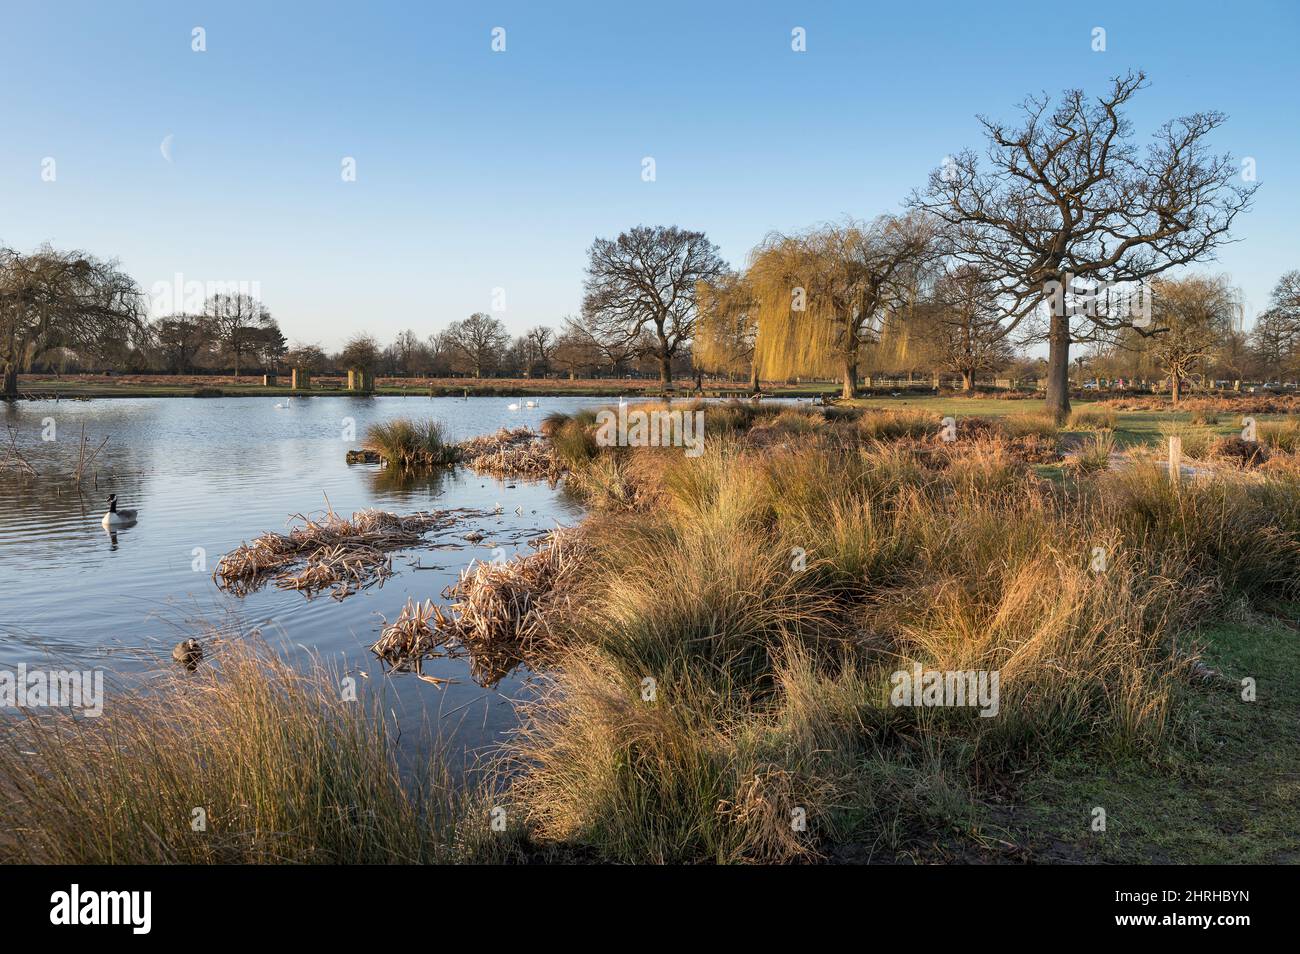 Just a glimpse of the moon looking over Heron pond Bushy Park Surrey early morning in late February Stock Photo